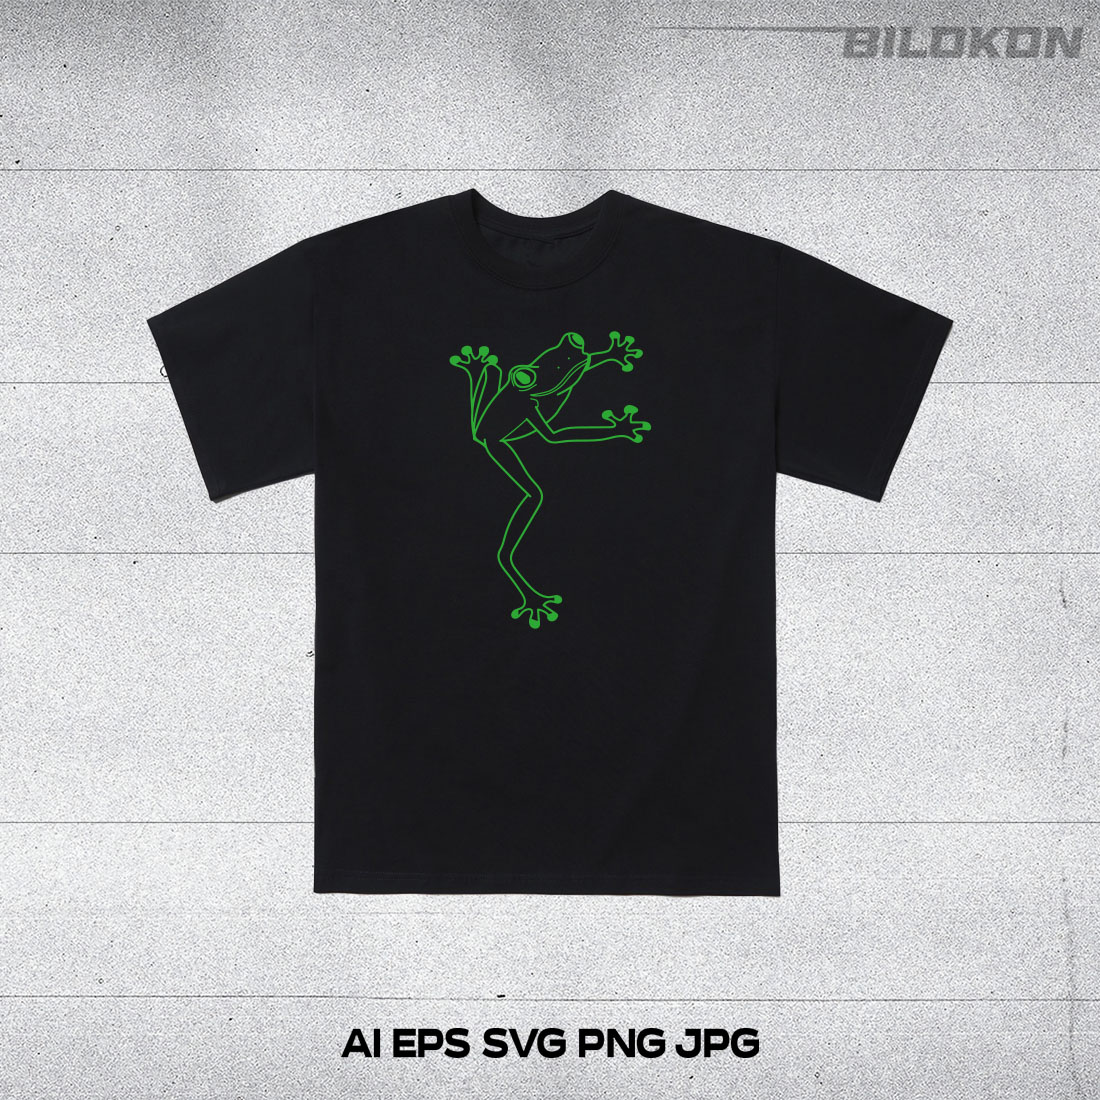 Black t - shirt with a green lizard on it.